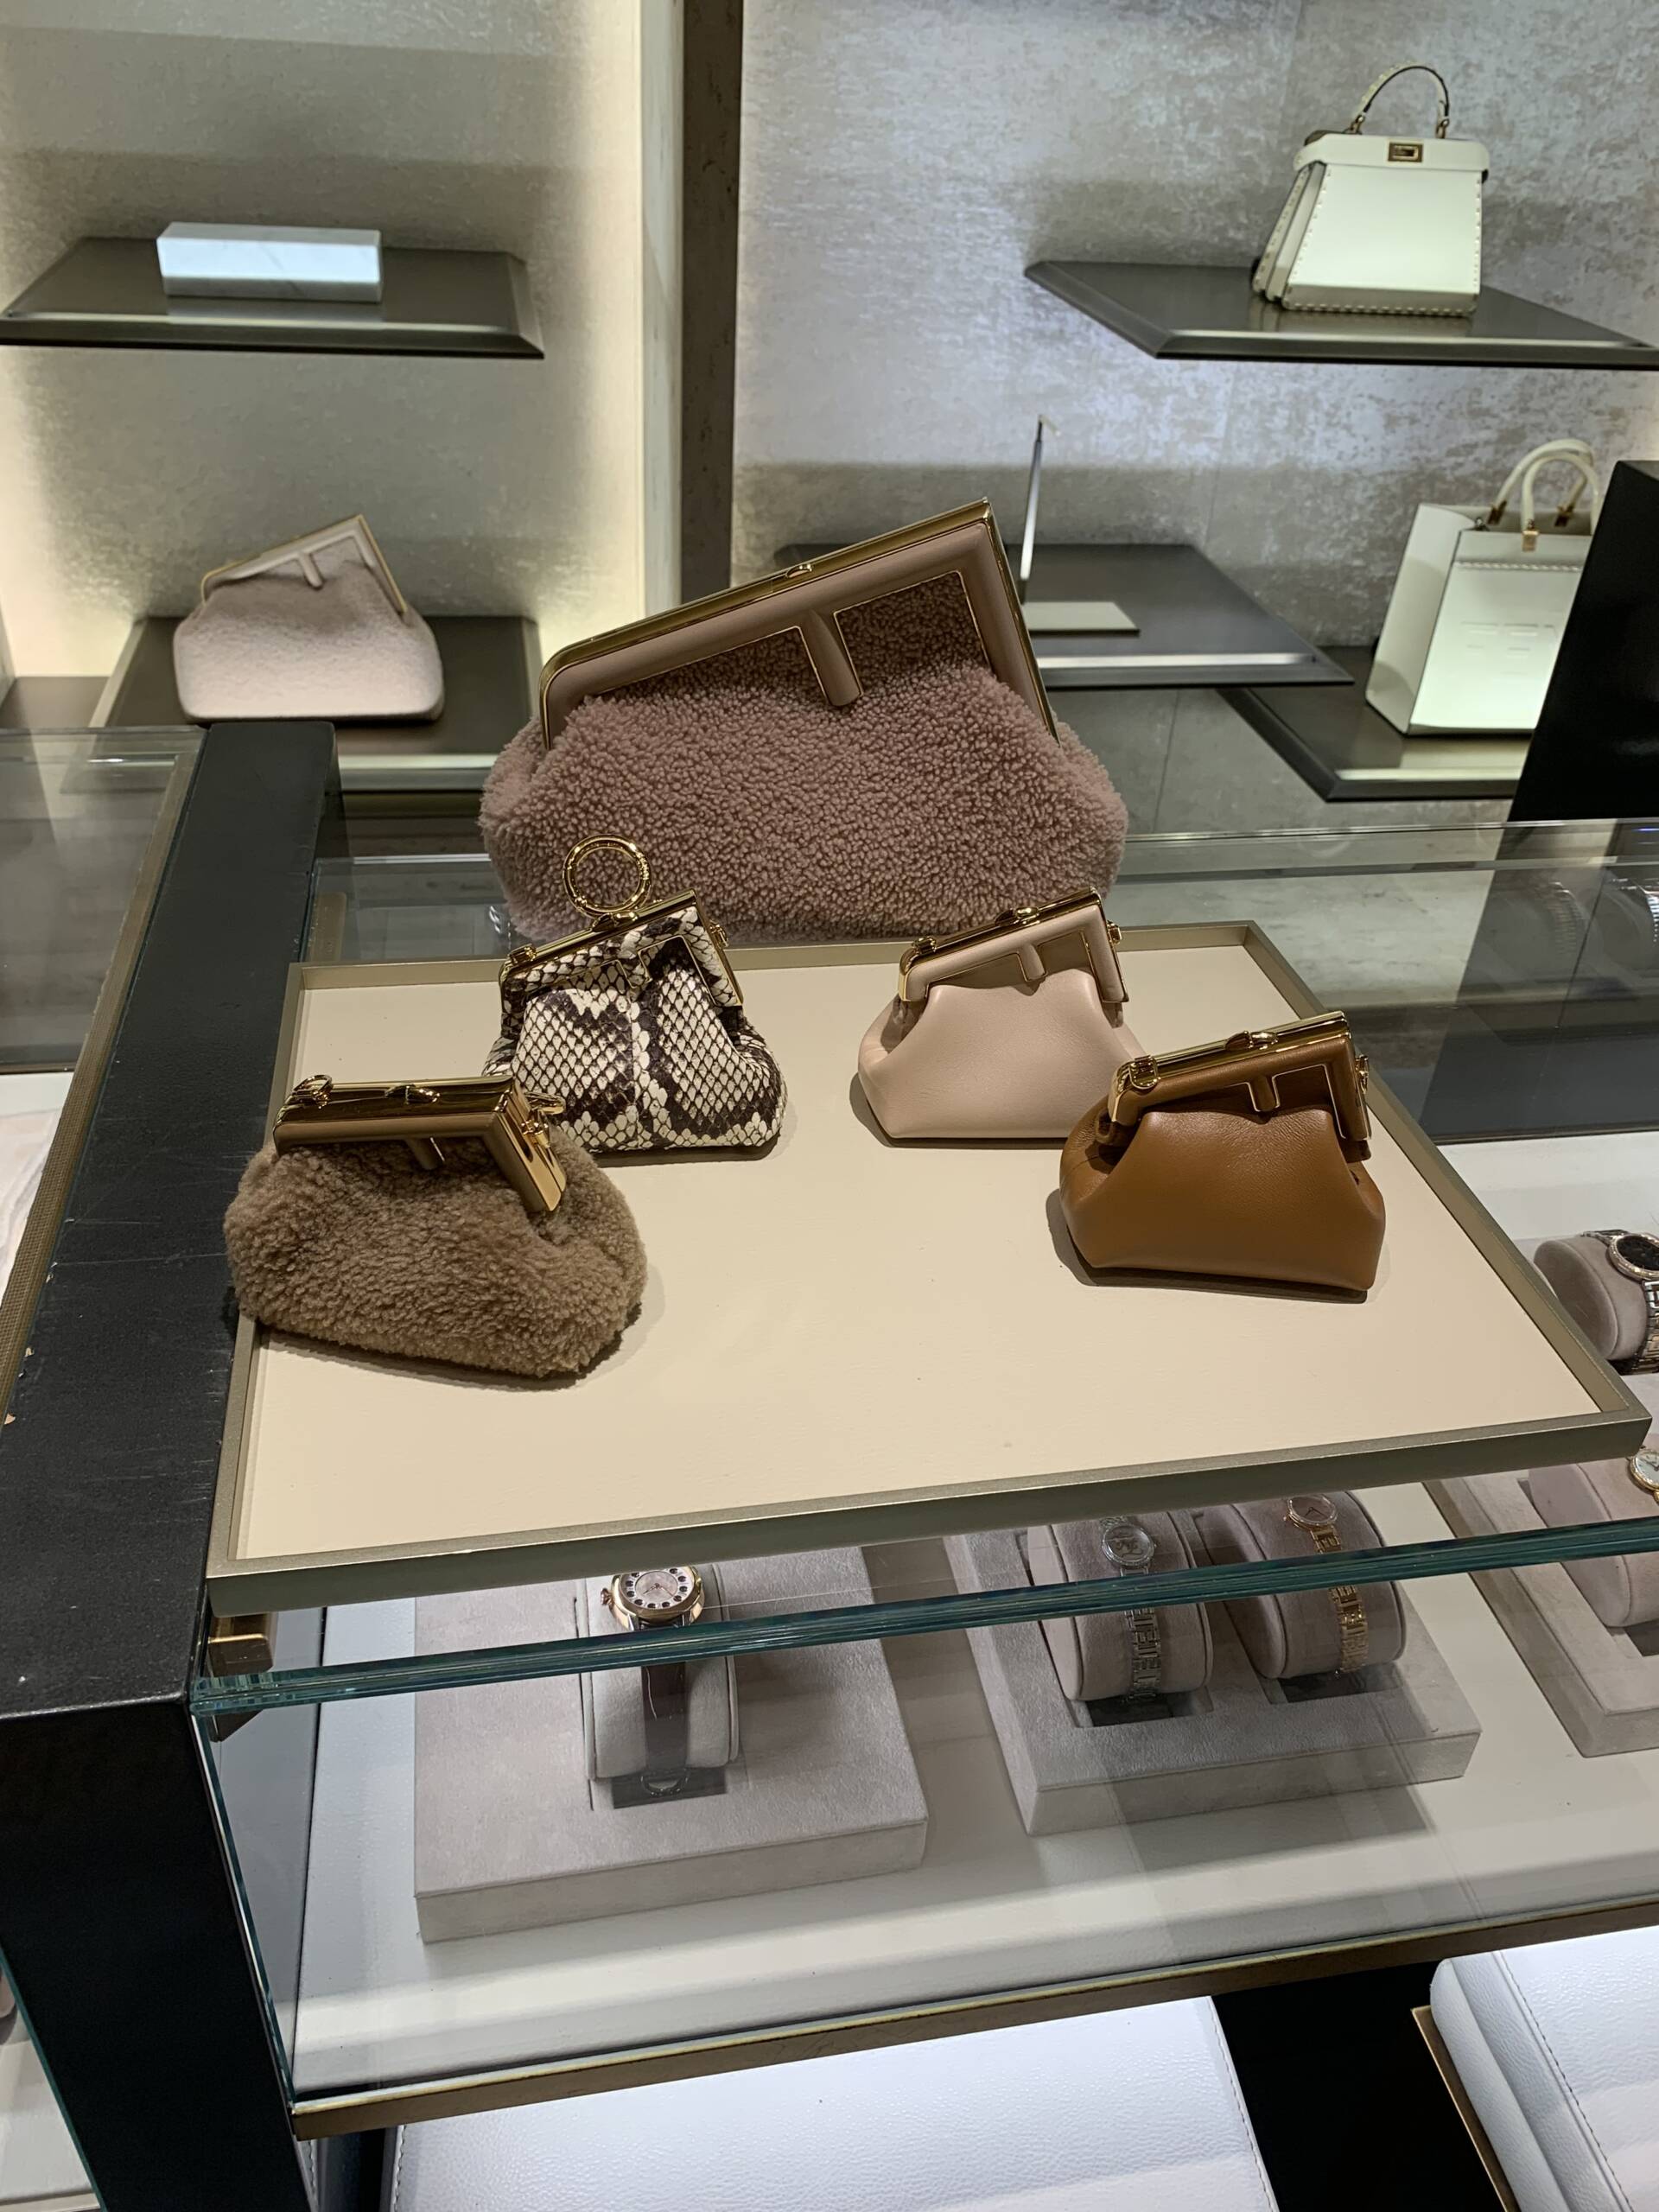 The new Fendi Pop-Up at Galeries Lafayette featuring an exclusive preview  of the Fendi Qu Tweet capsule collection